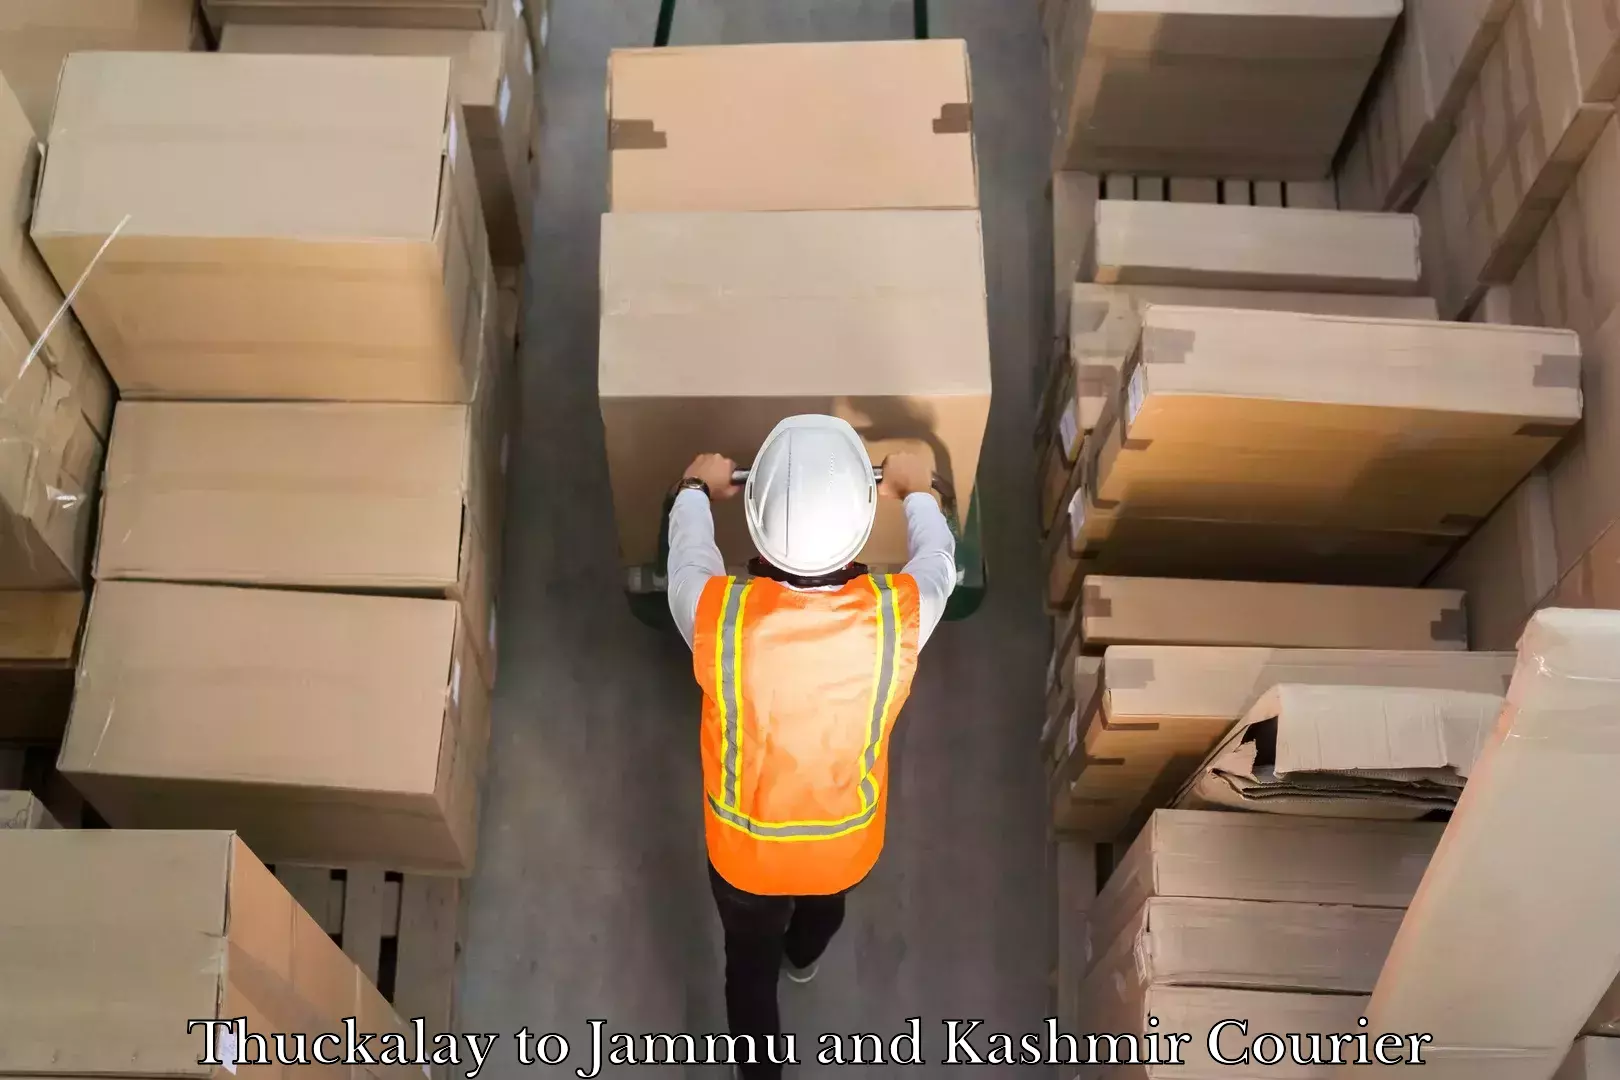 Efficient parcel tracking Thuckalay to Jammu and Kashmir